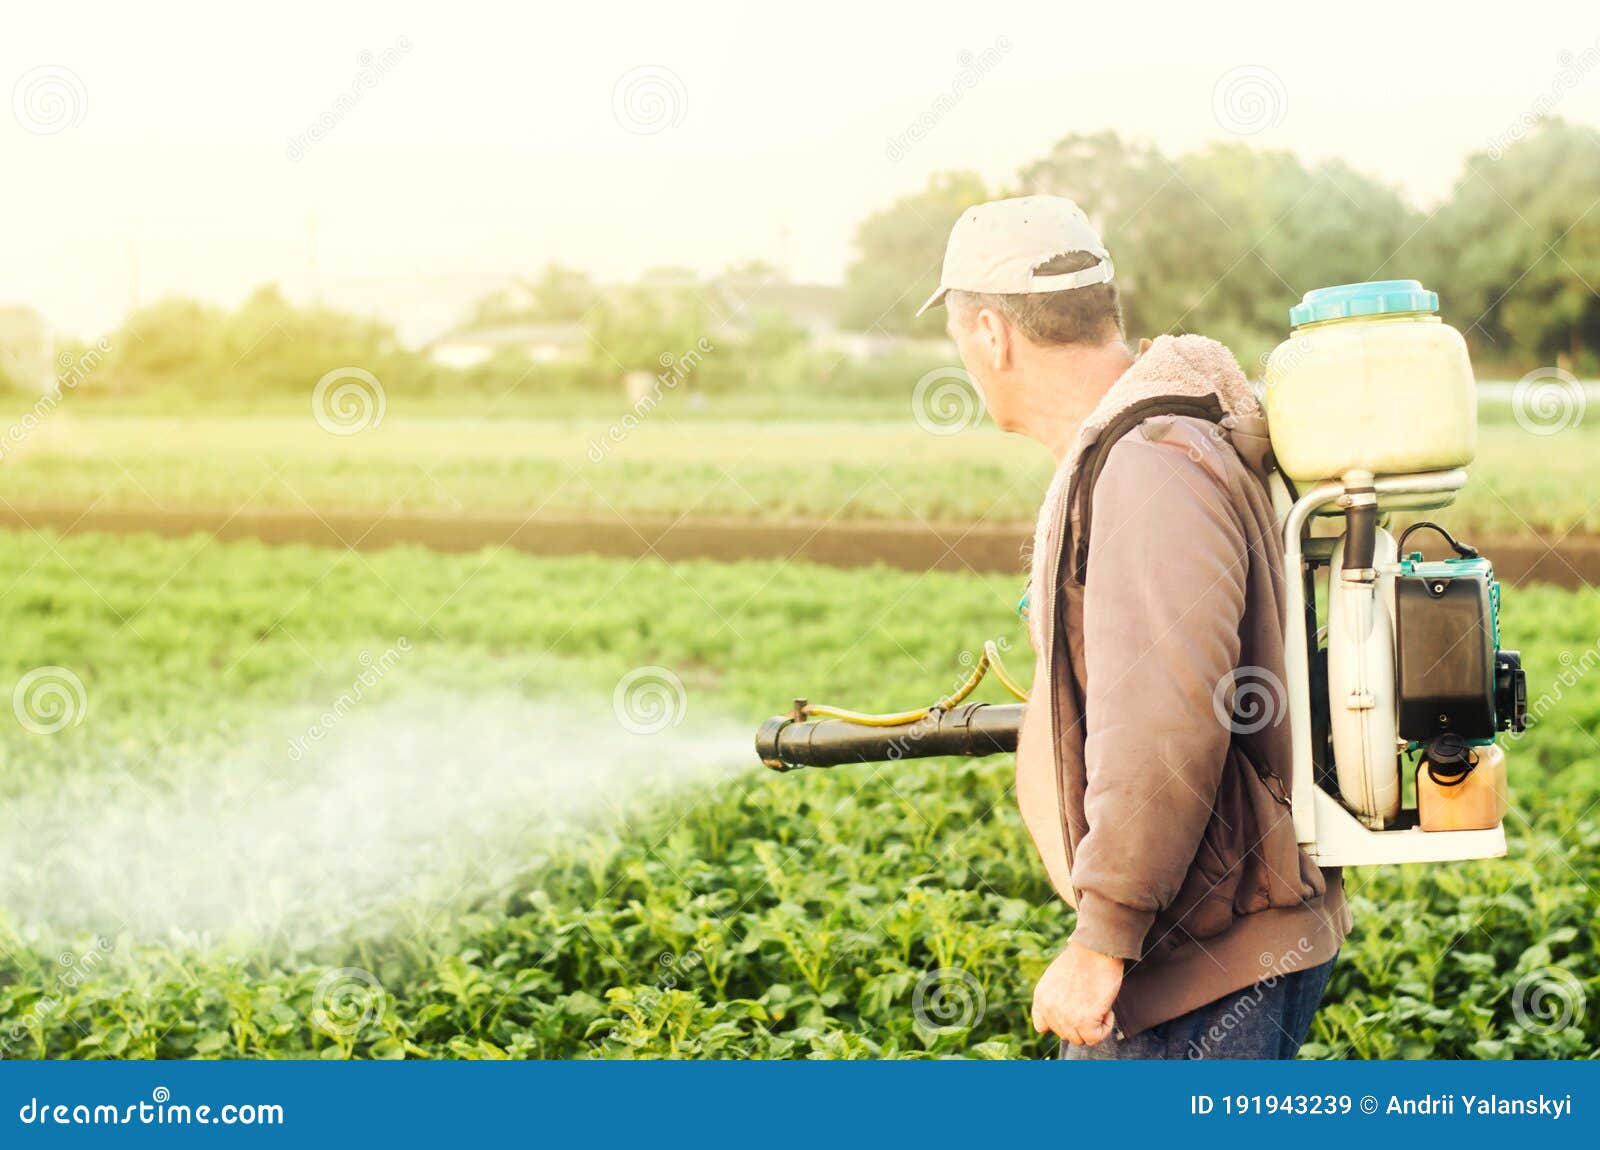 a farmer with a mist sprayer spray treats the potato plantation from pests and fungus infection. agriculture and agribusiness.